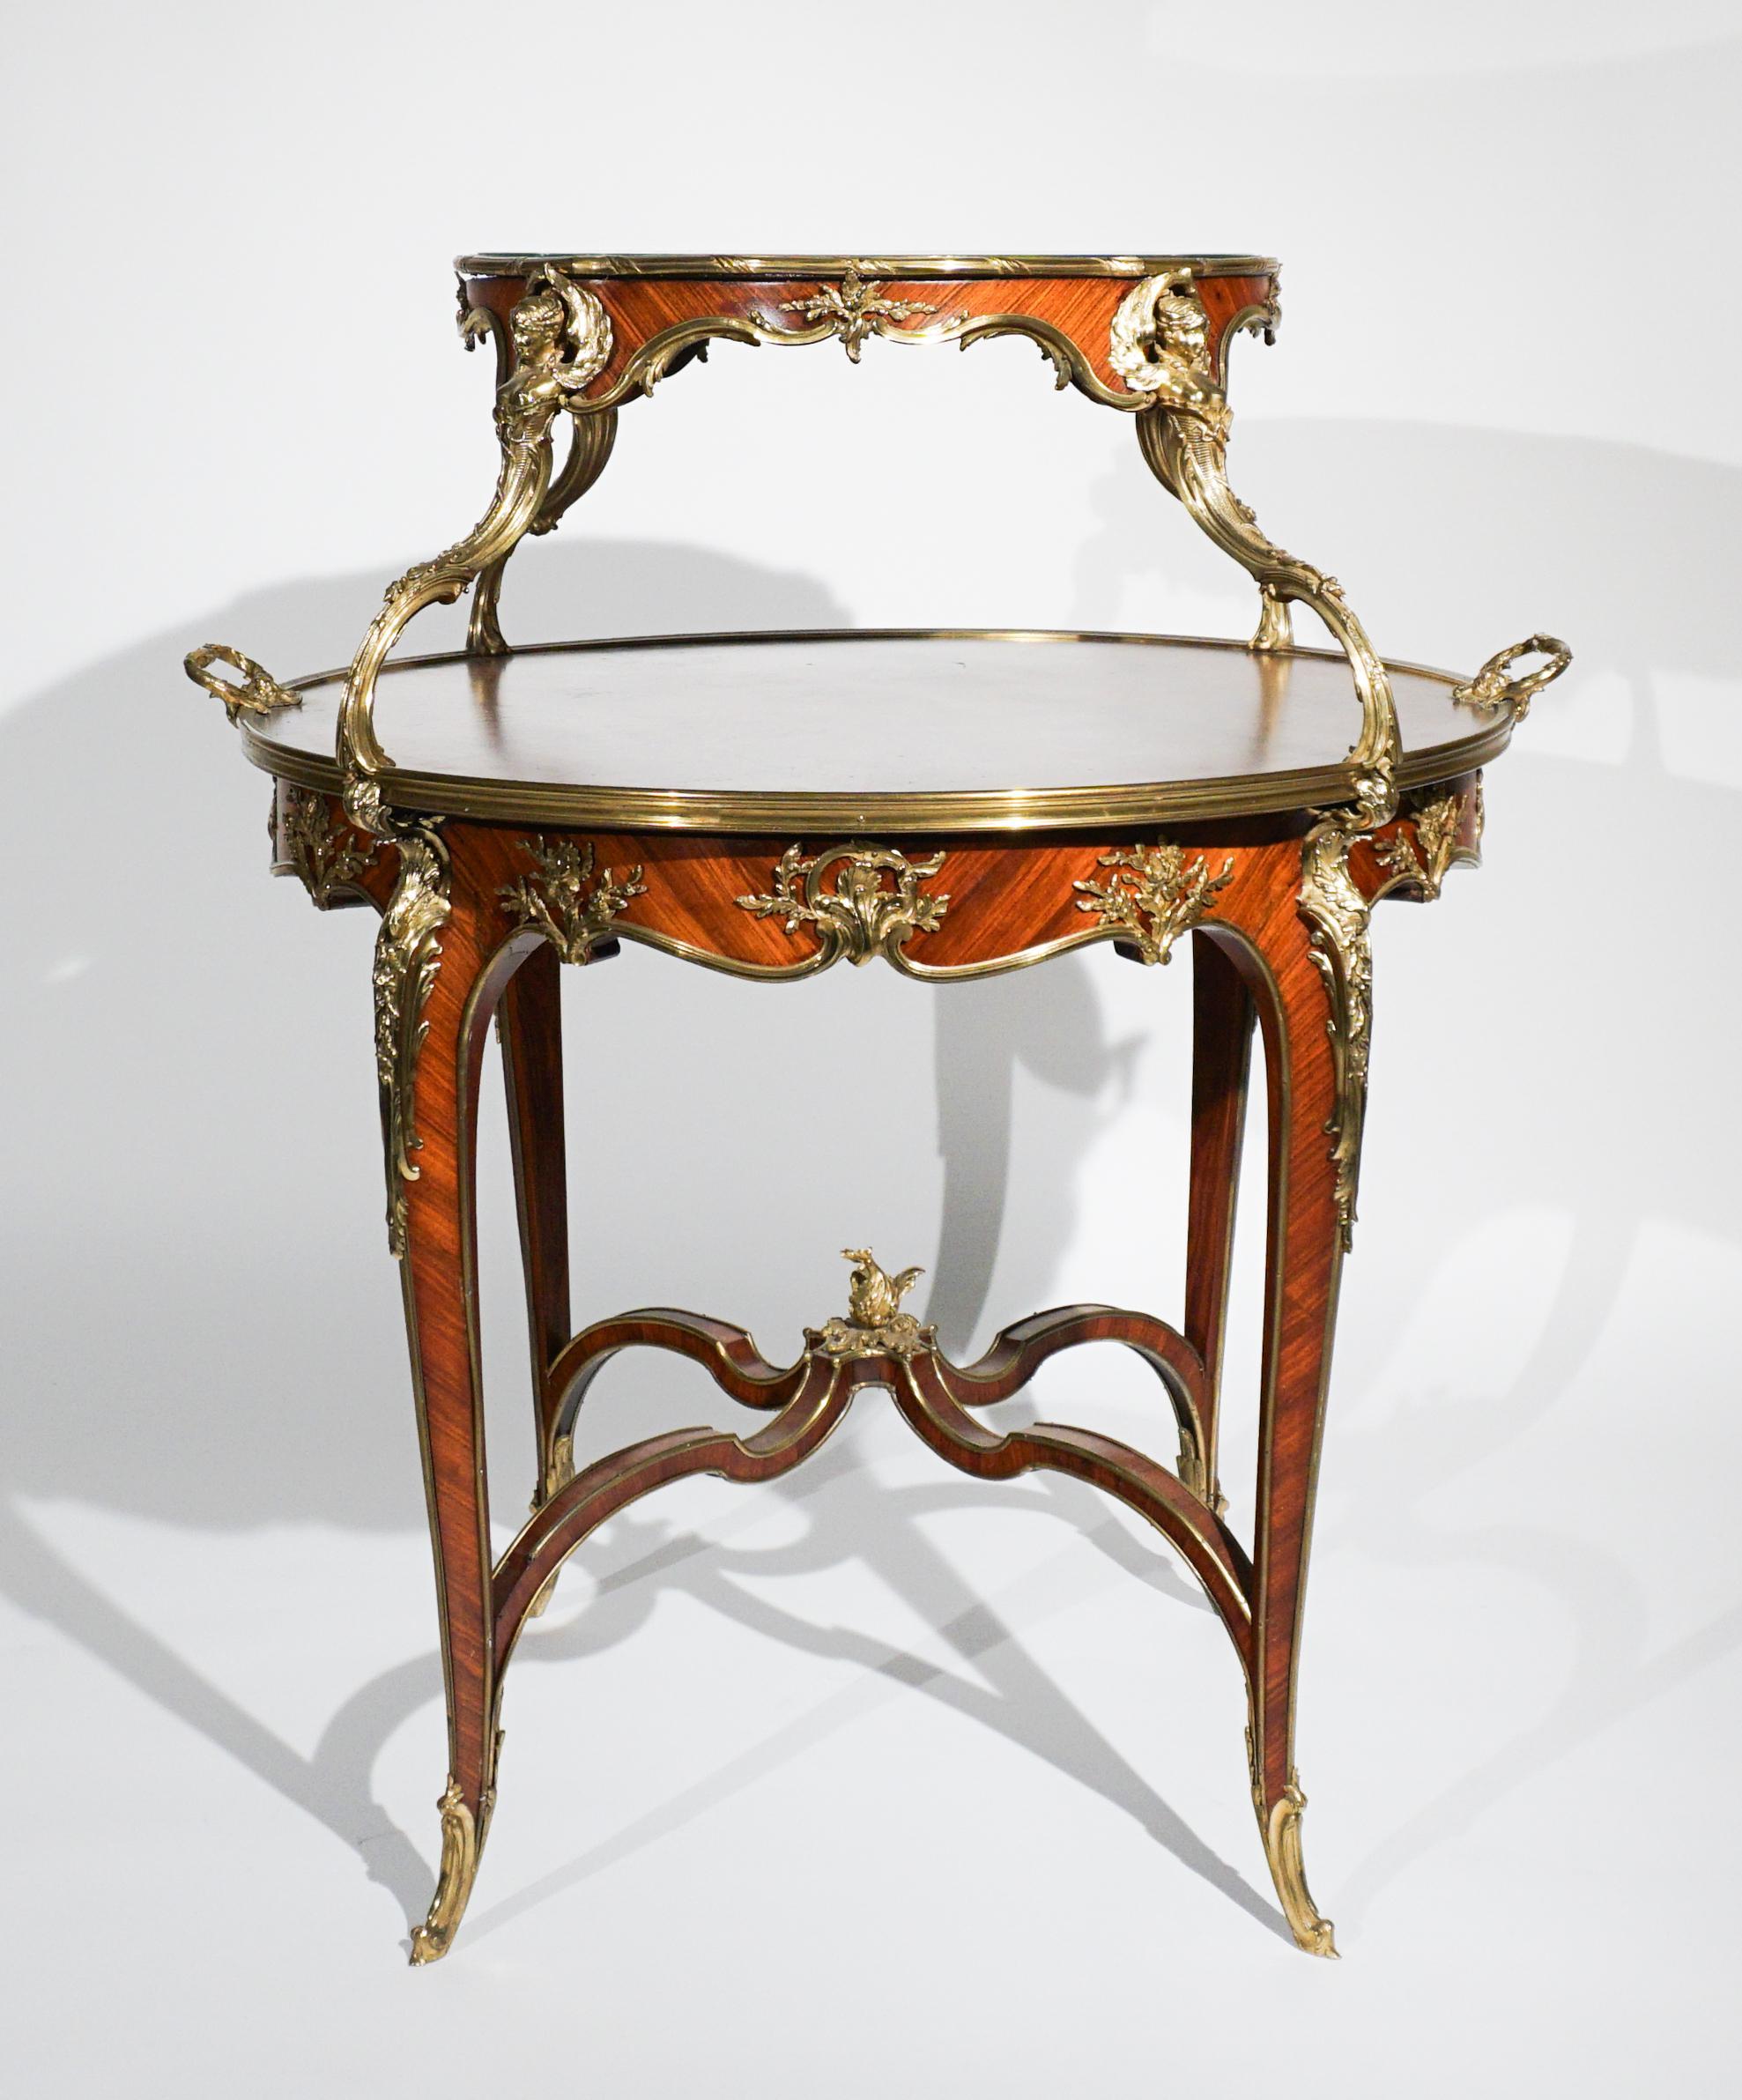 19th C. Joseph E. Zwiemer Kingwood, Satine and Bois de Bout Marquetry Tea Table For Sale 3